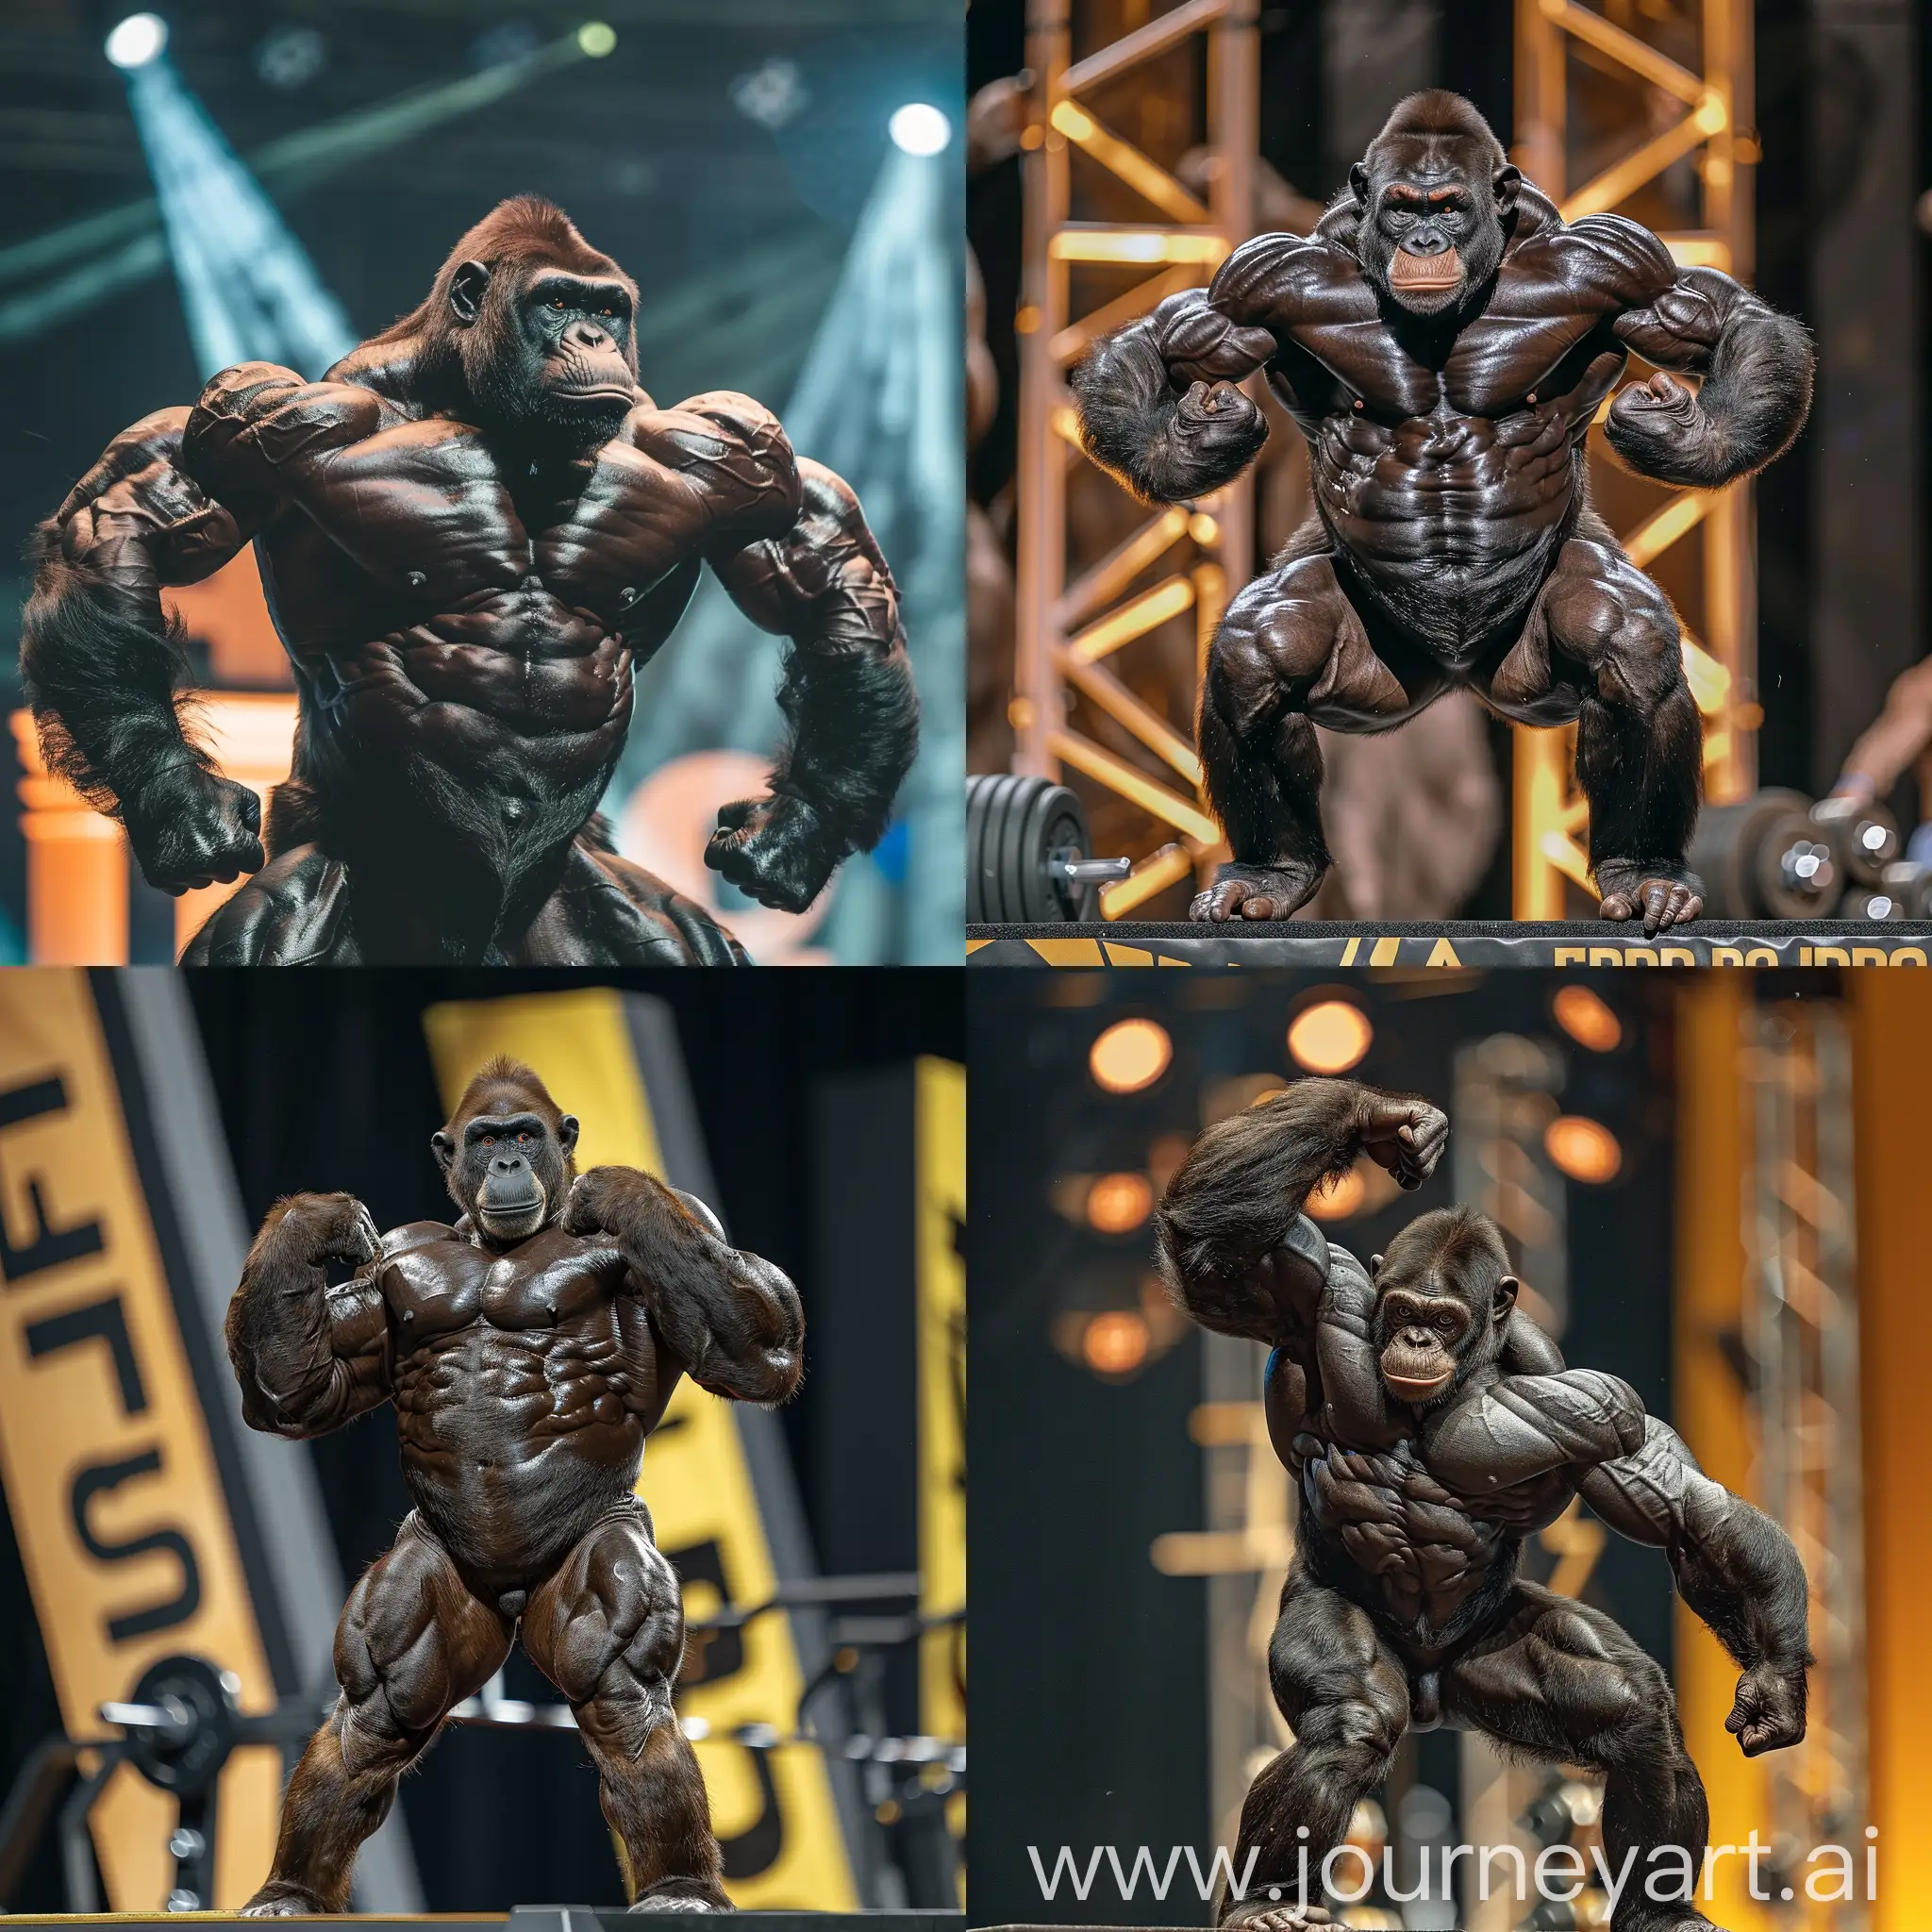 IFBB Pro Physique The monkey Ape posing on Olympia stage